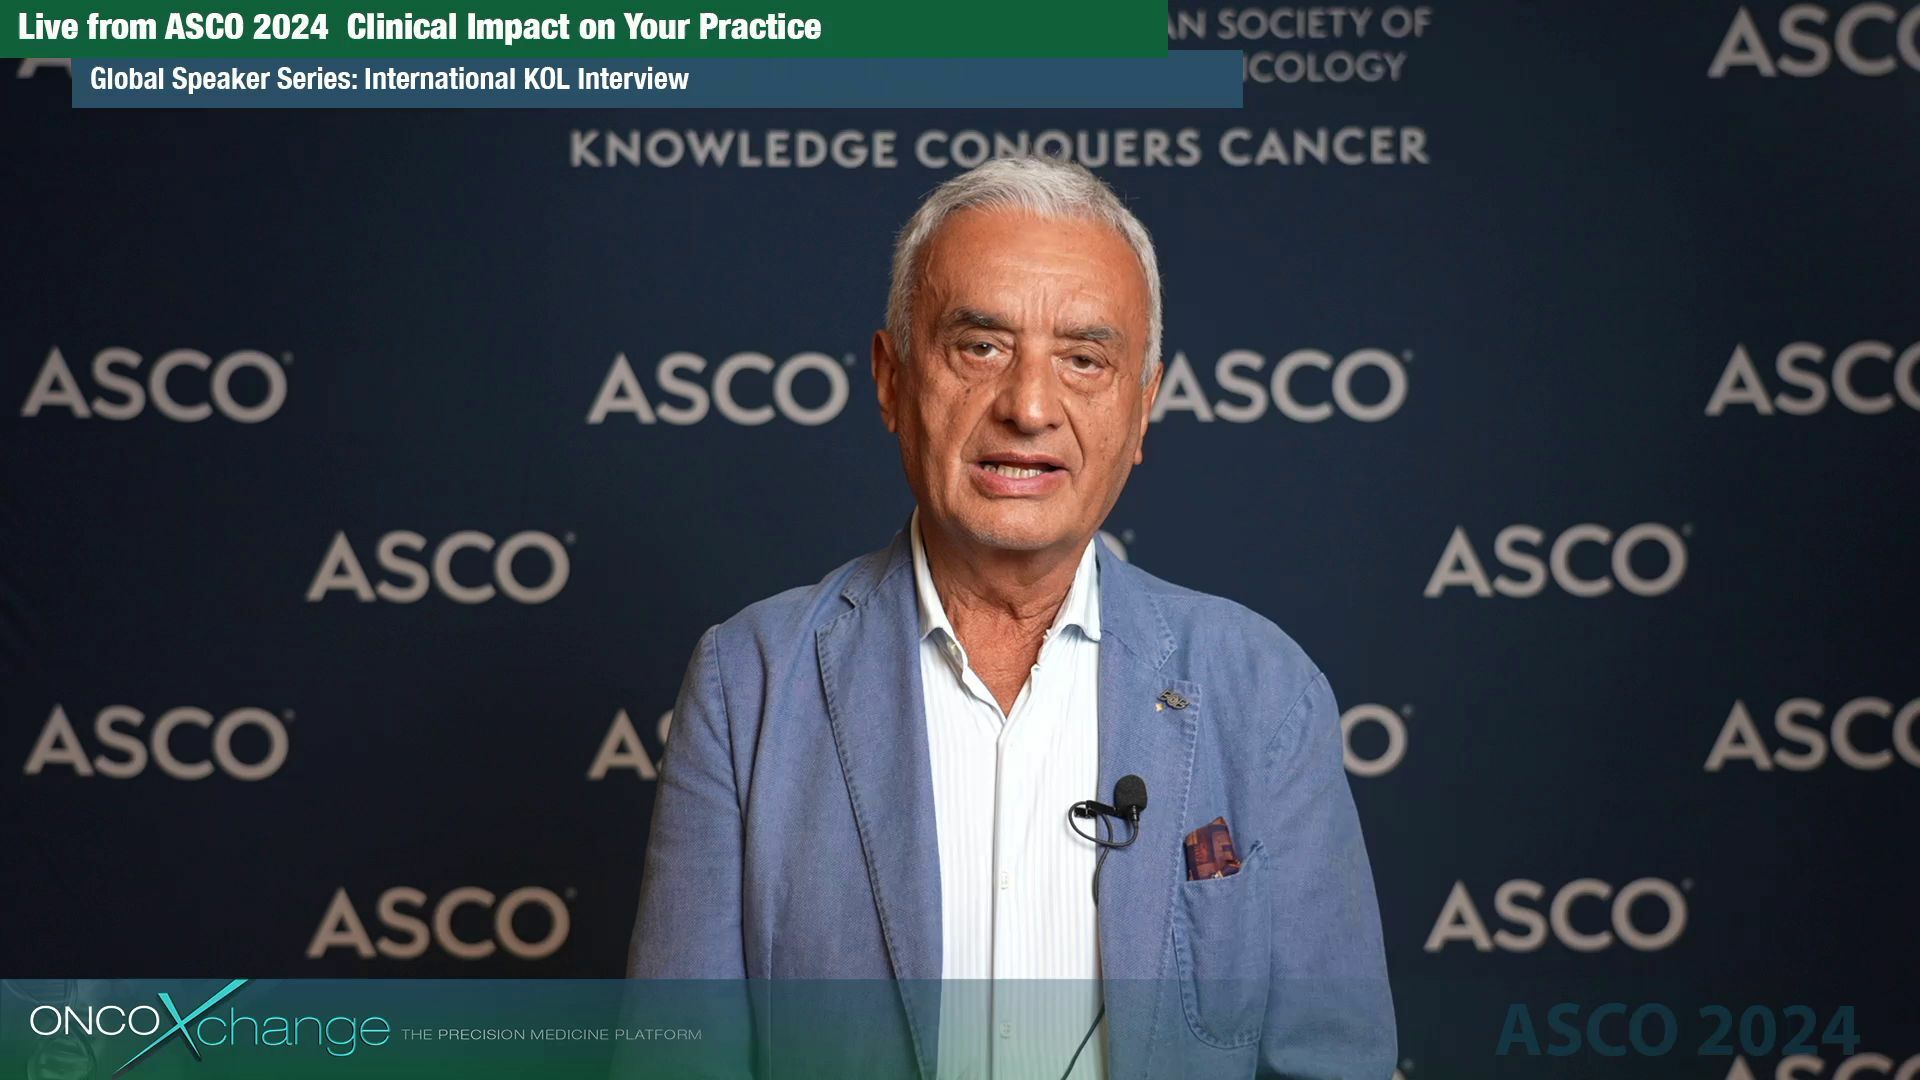 ASCO 2024 : Global Speaker Series with Dr. Conte